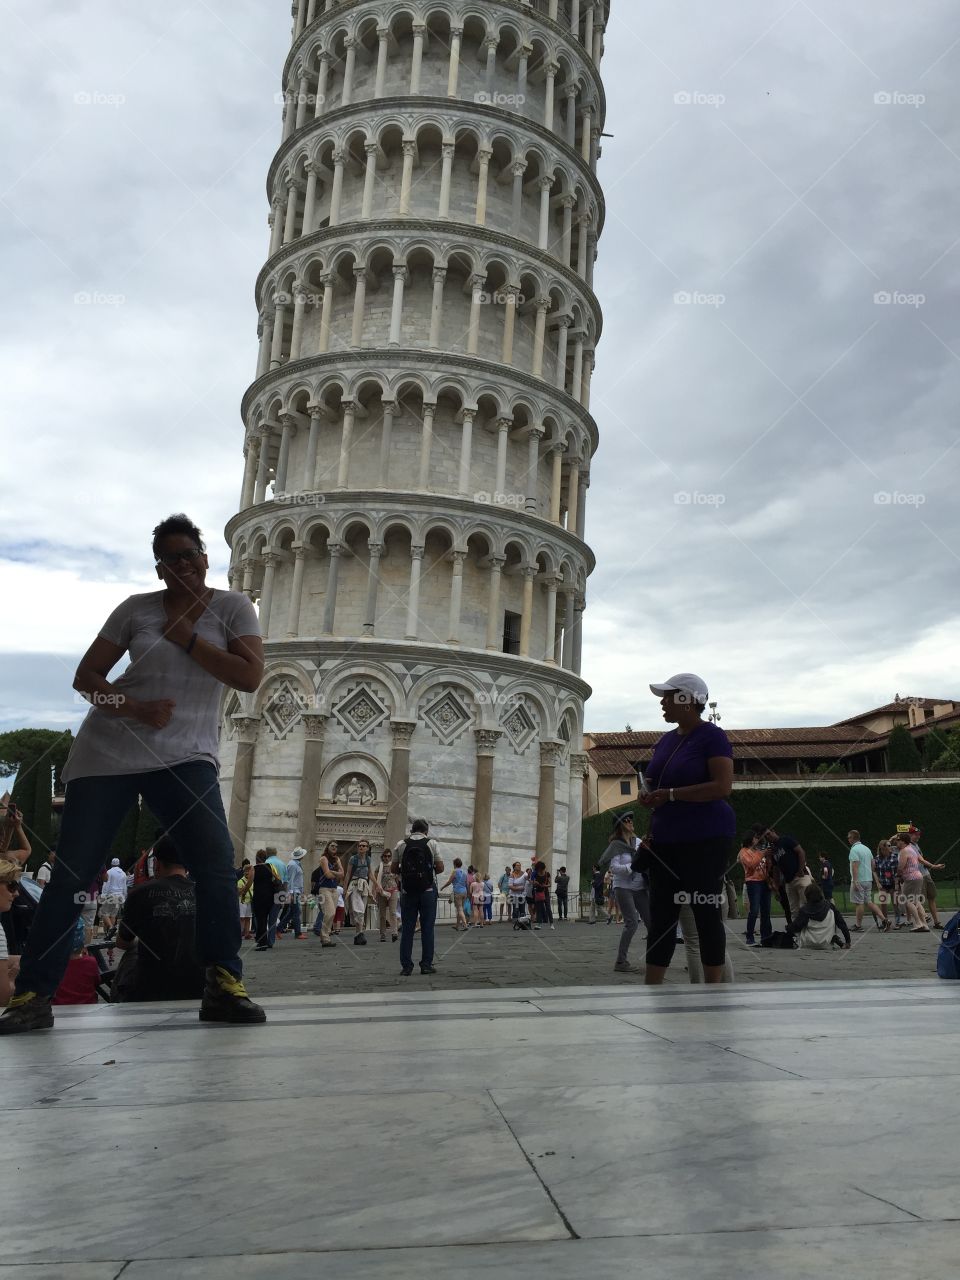 The Leaning Tower of Pisa and me.